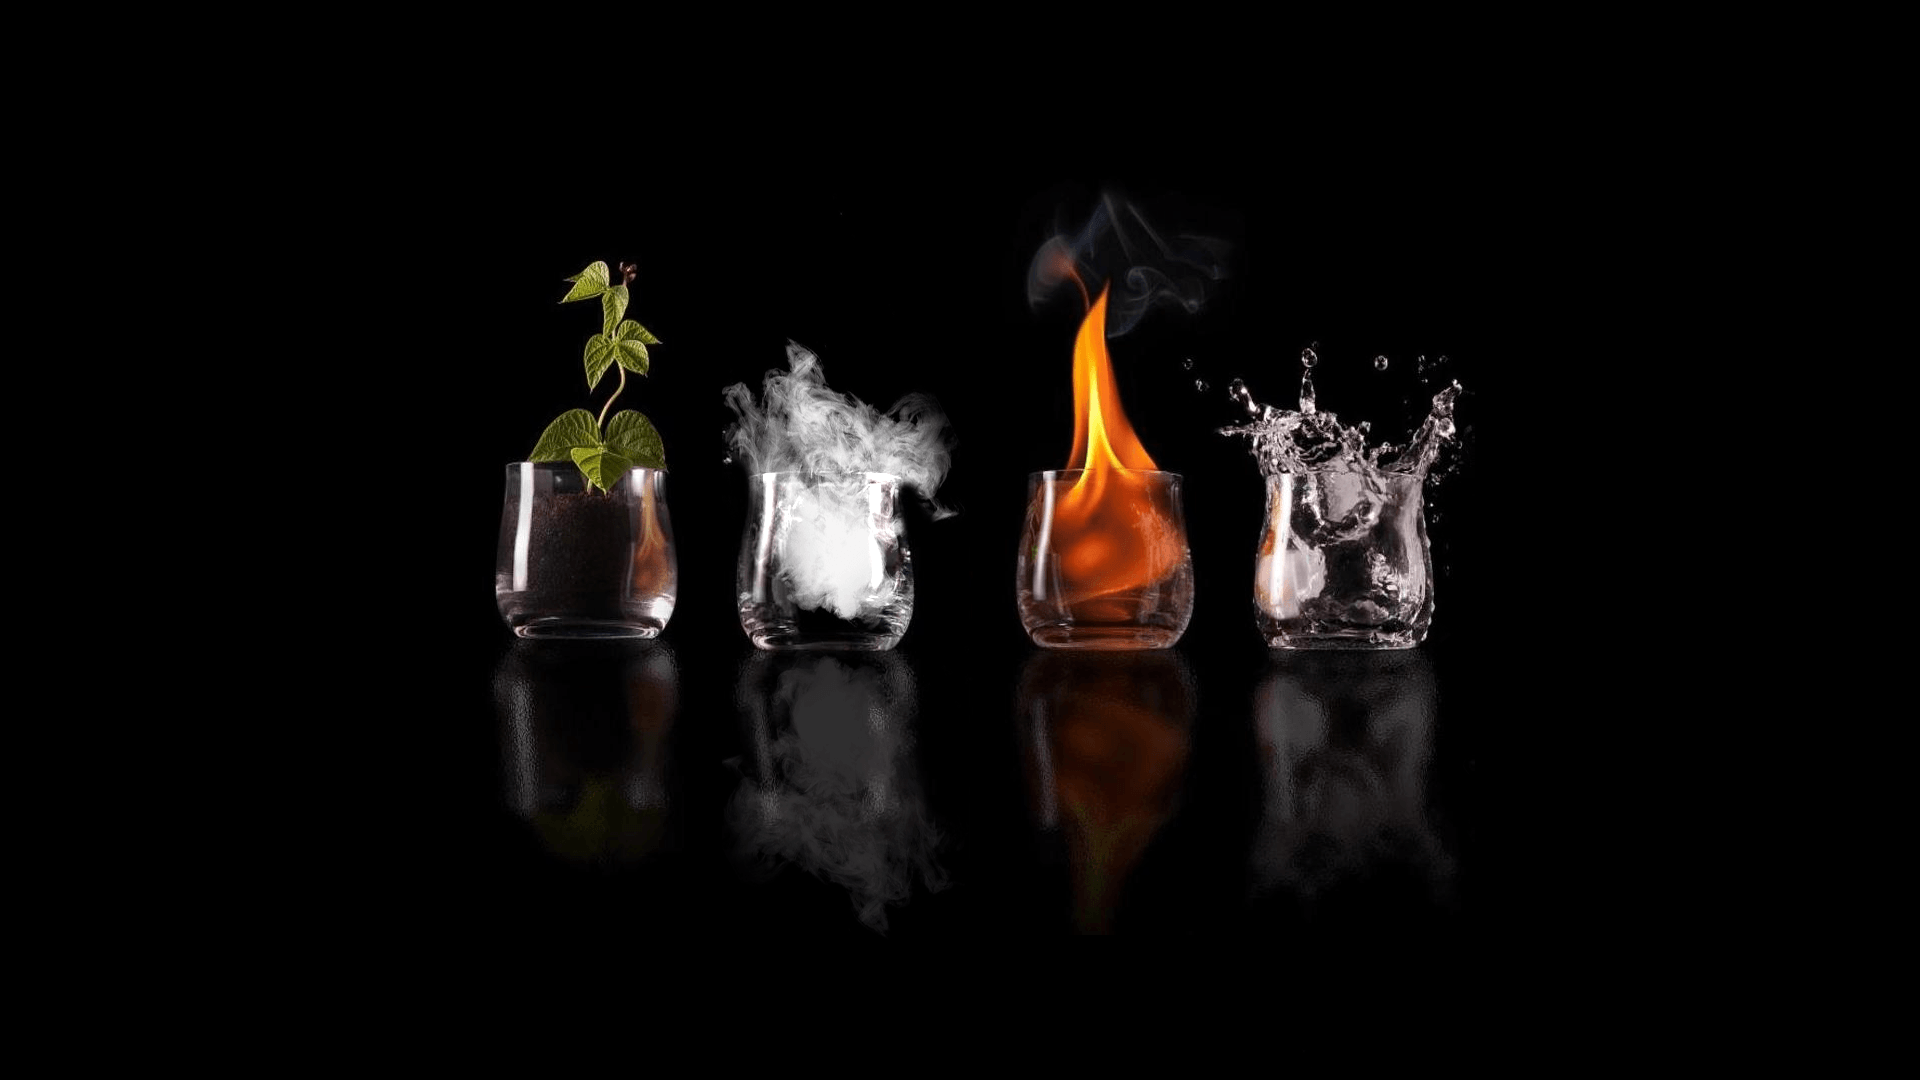 The Four Elements. (Saw It On R Pics Decided To Fix It Up) 1920 X